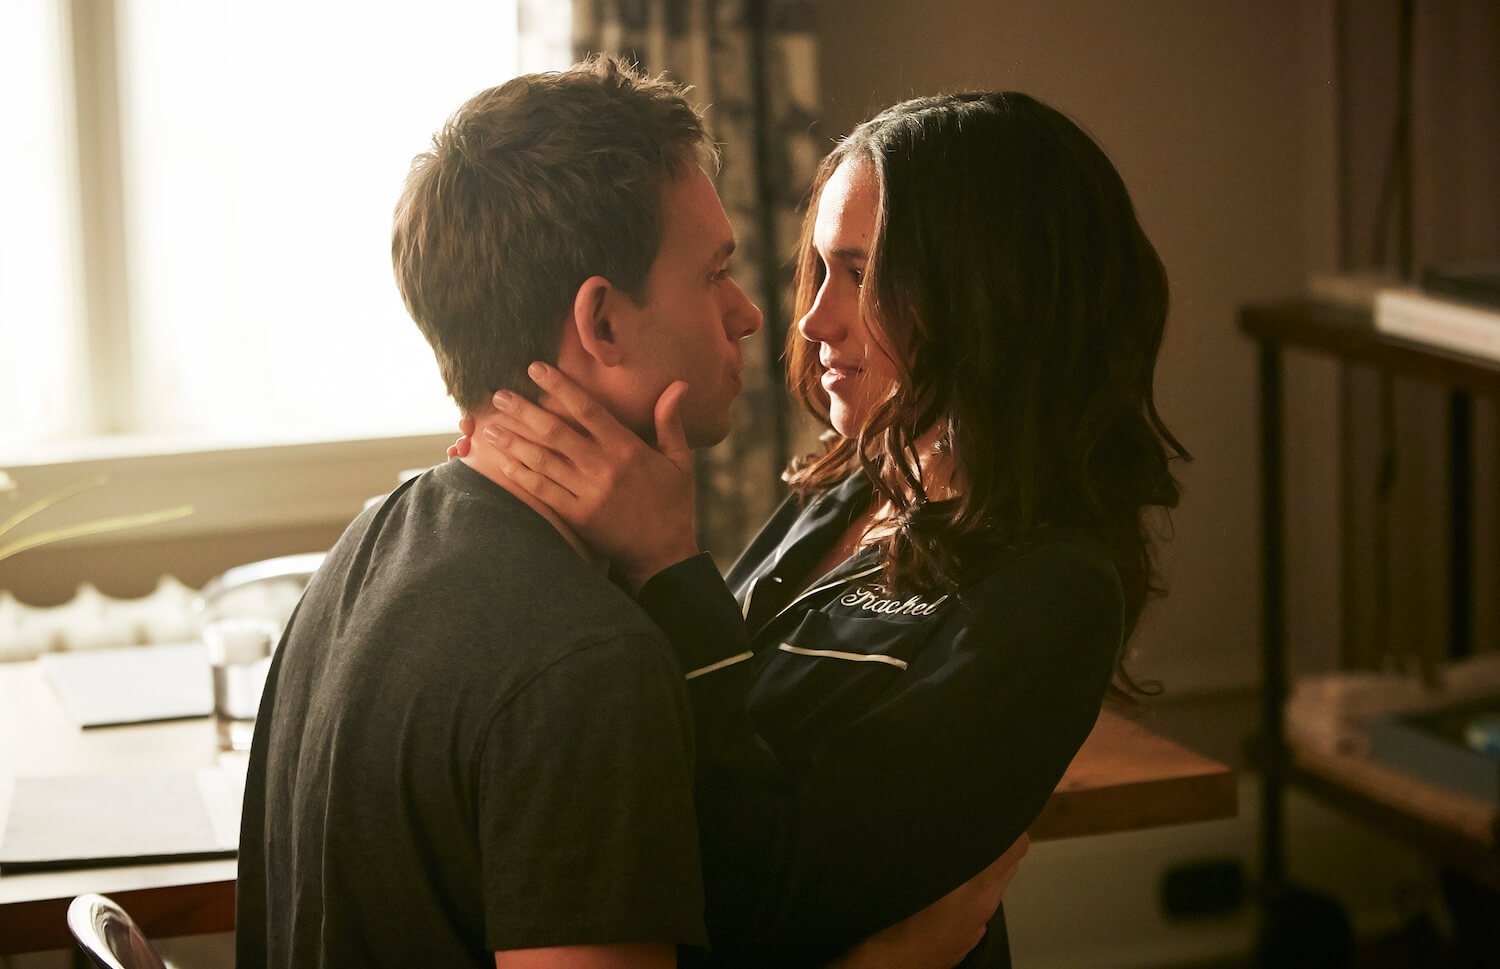 Patrick J. Adams as Michael Ross and Meghan Markle as Rachel Zane in 'Suits.' Michael and Rachel are embracing each other and looking into each other's eyes.